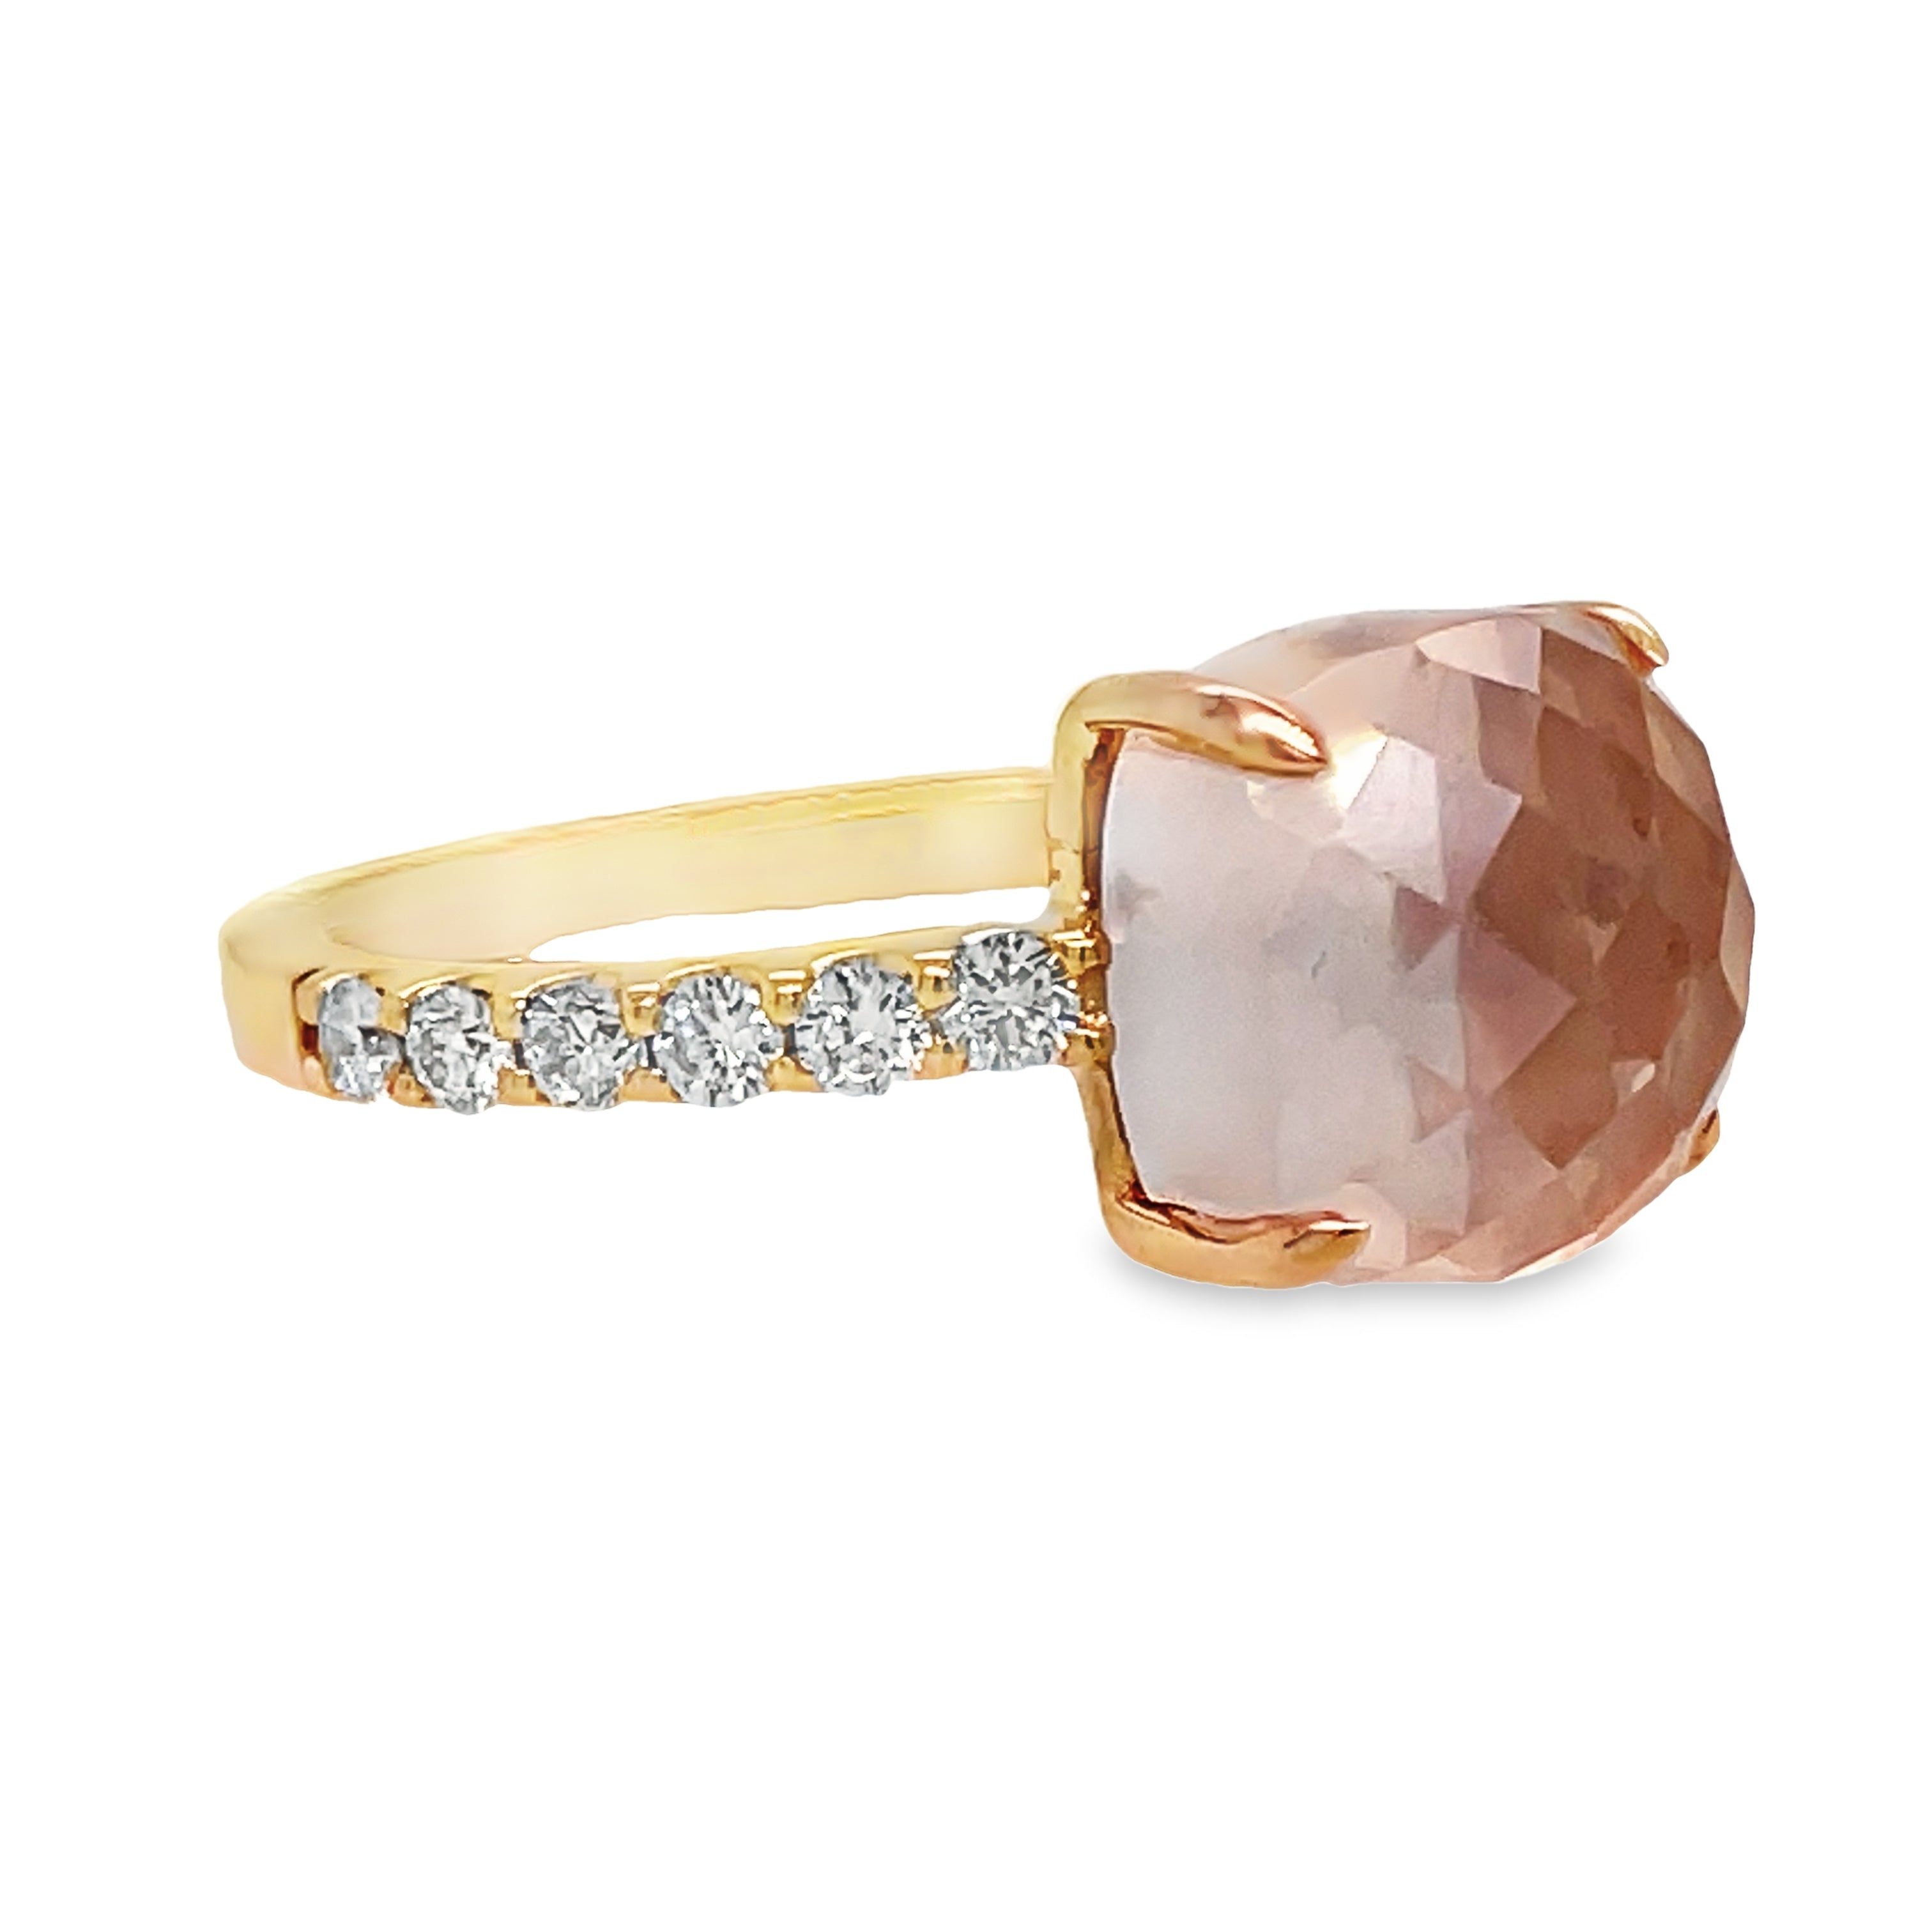 levate any look with our stunning Faceted Pink Quartz Cube Diamond Ring in Rose Gold. Made with 14k rose gold and featuring a faceted 10.00mm rose quartz cube, this ring is the perfect combination of elegance and sophistication. Each ring also boasts 0.65 carats of round diamonds to add a touch of sparkle to your style. Available in size 6.5.